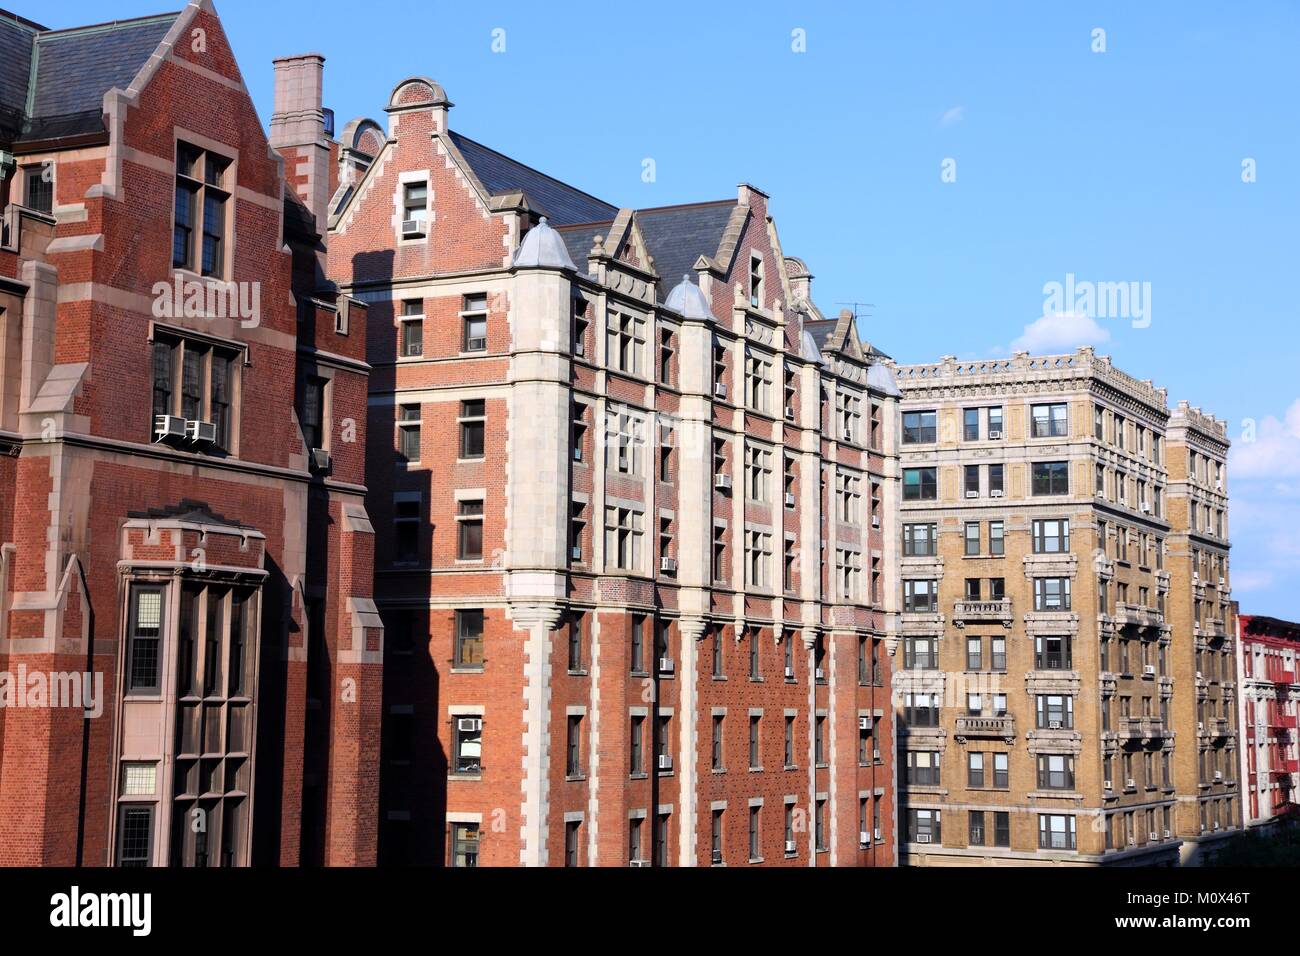 New York City, United States - famous Columbia University campus in Upper Manhattan (Morningside Heights neighborhood of Upper West Side) Stock Photo